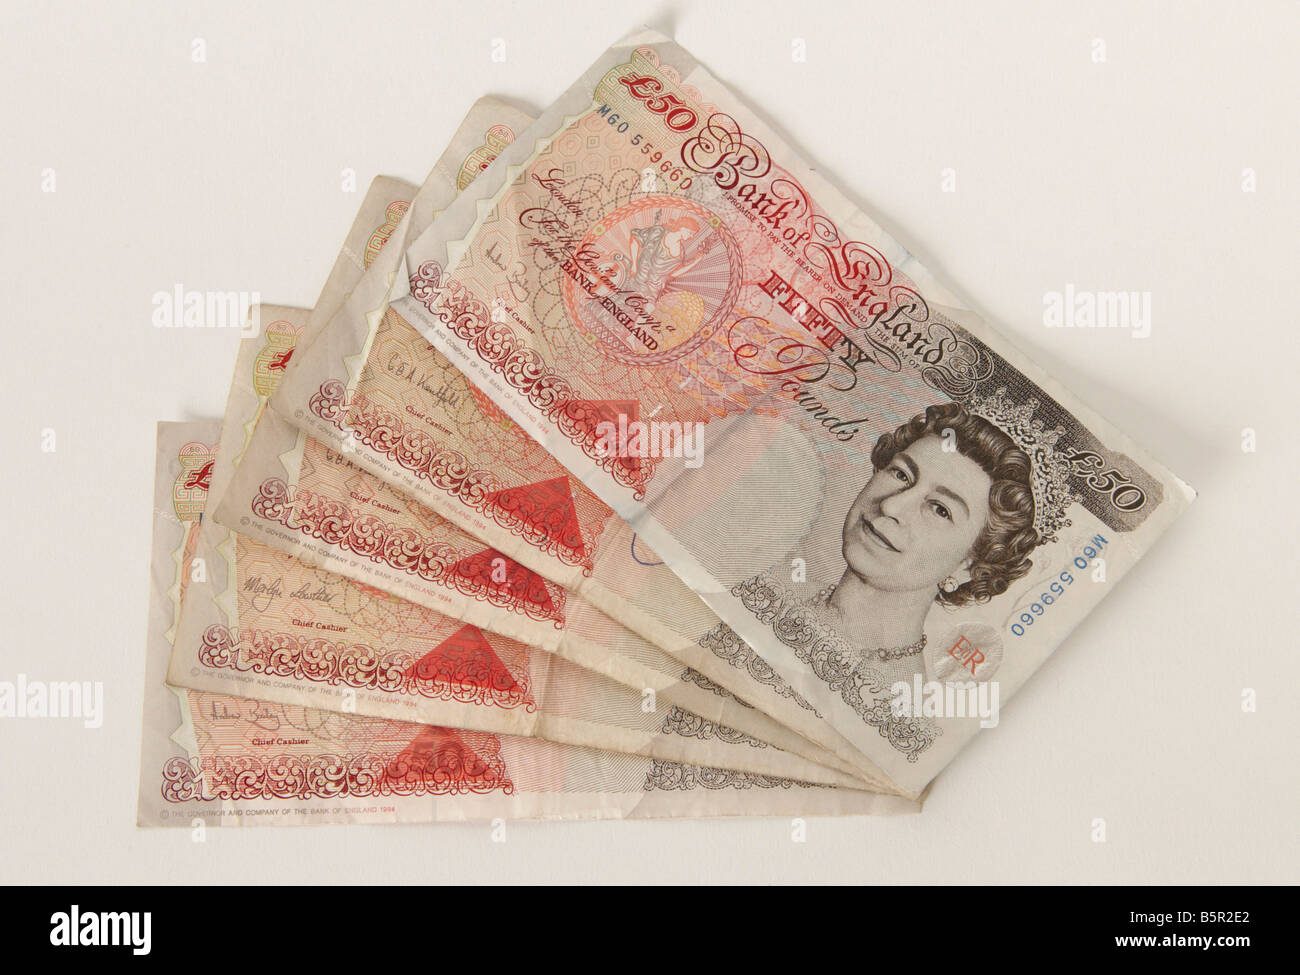 A pile of British Pound £50 banks notes Stock Photo